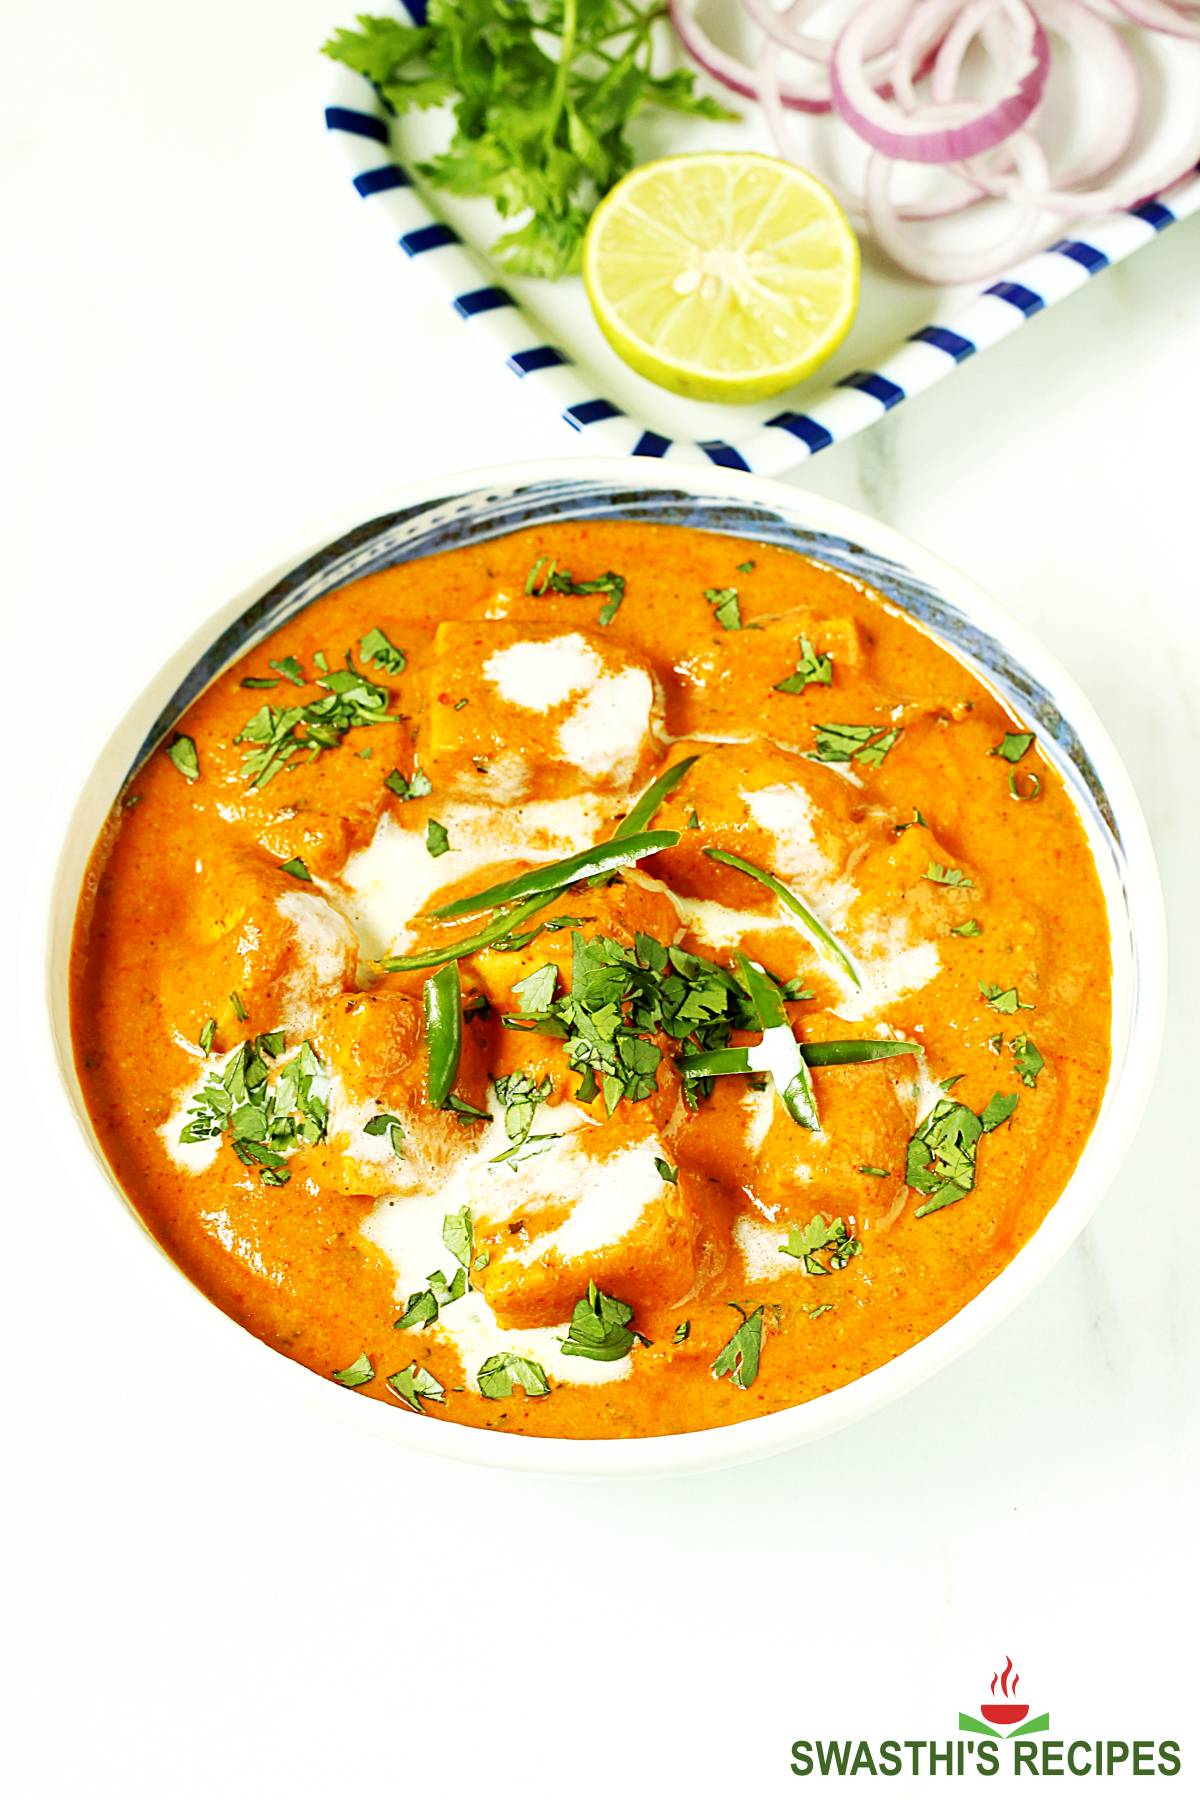 60 Paneer Recipes You Must Try! - Swasthi's Recipes